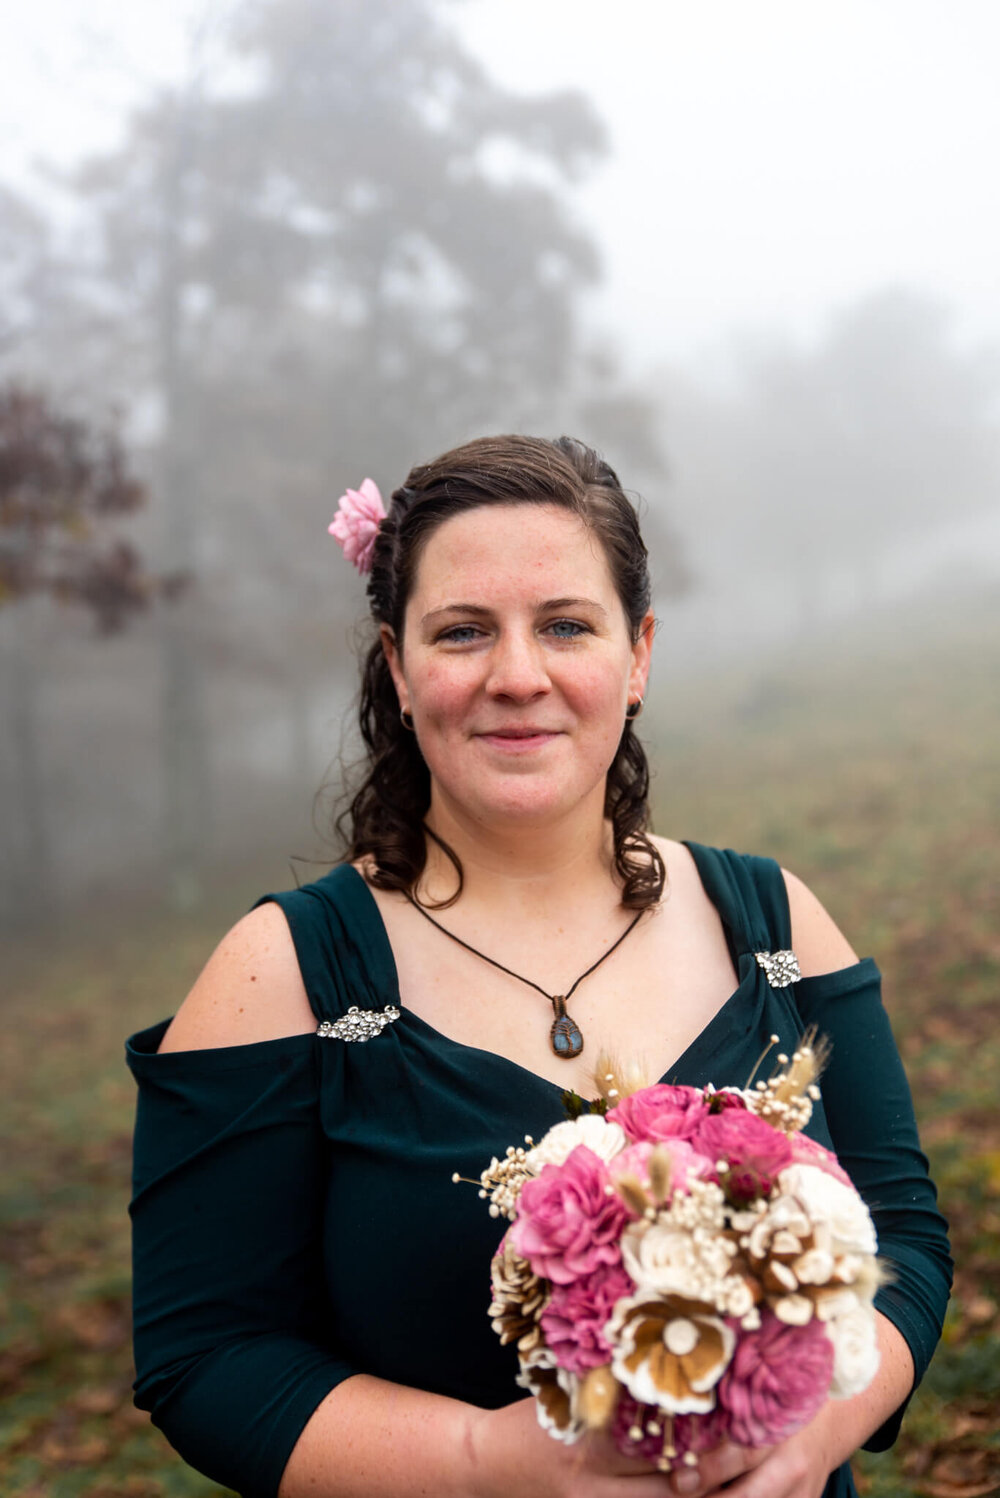 Bride in dark green wedding dress holding a simple pink and white bouquet in a foggy forest